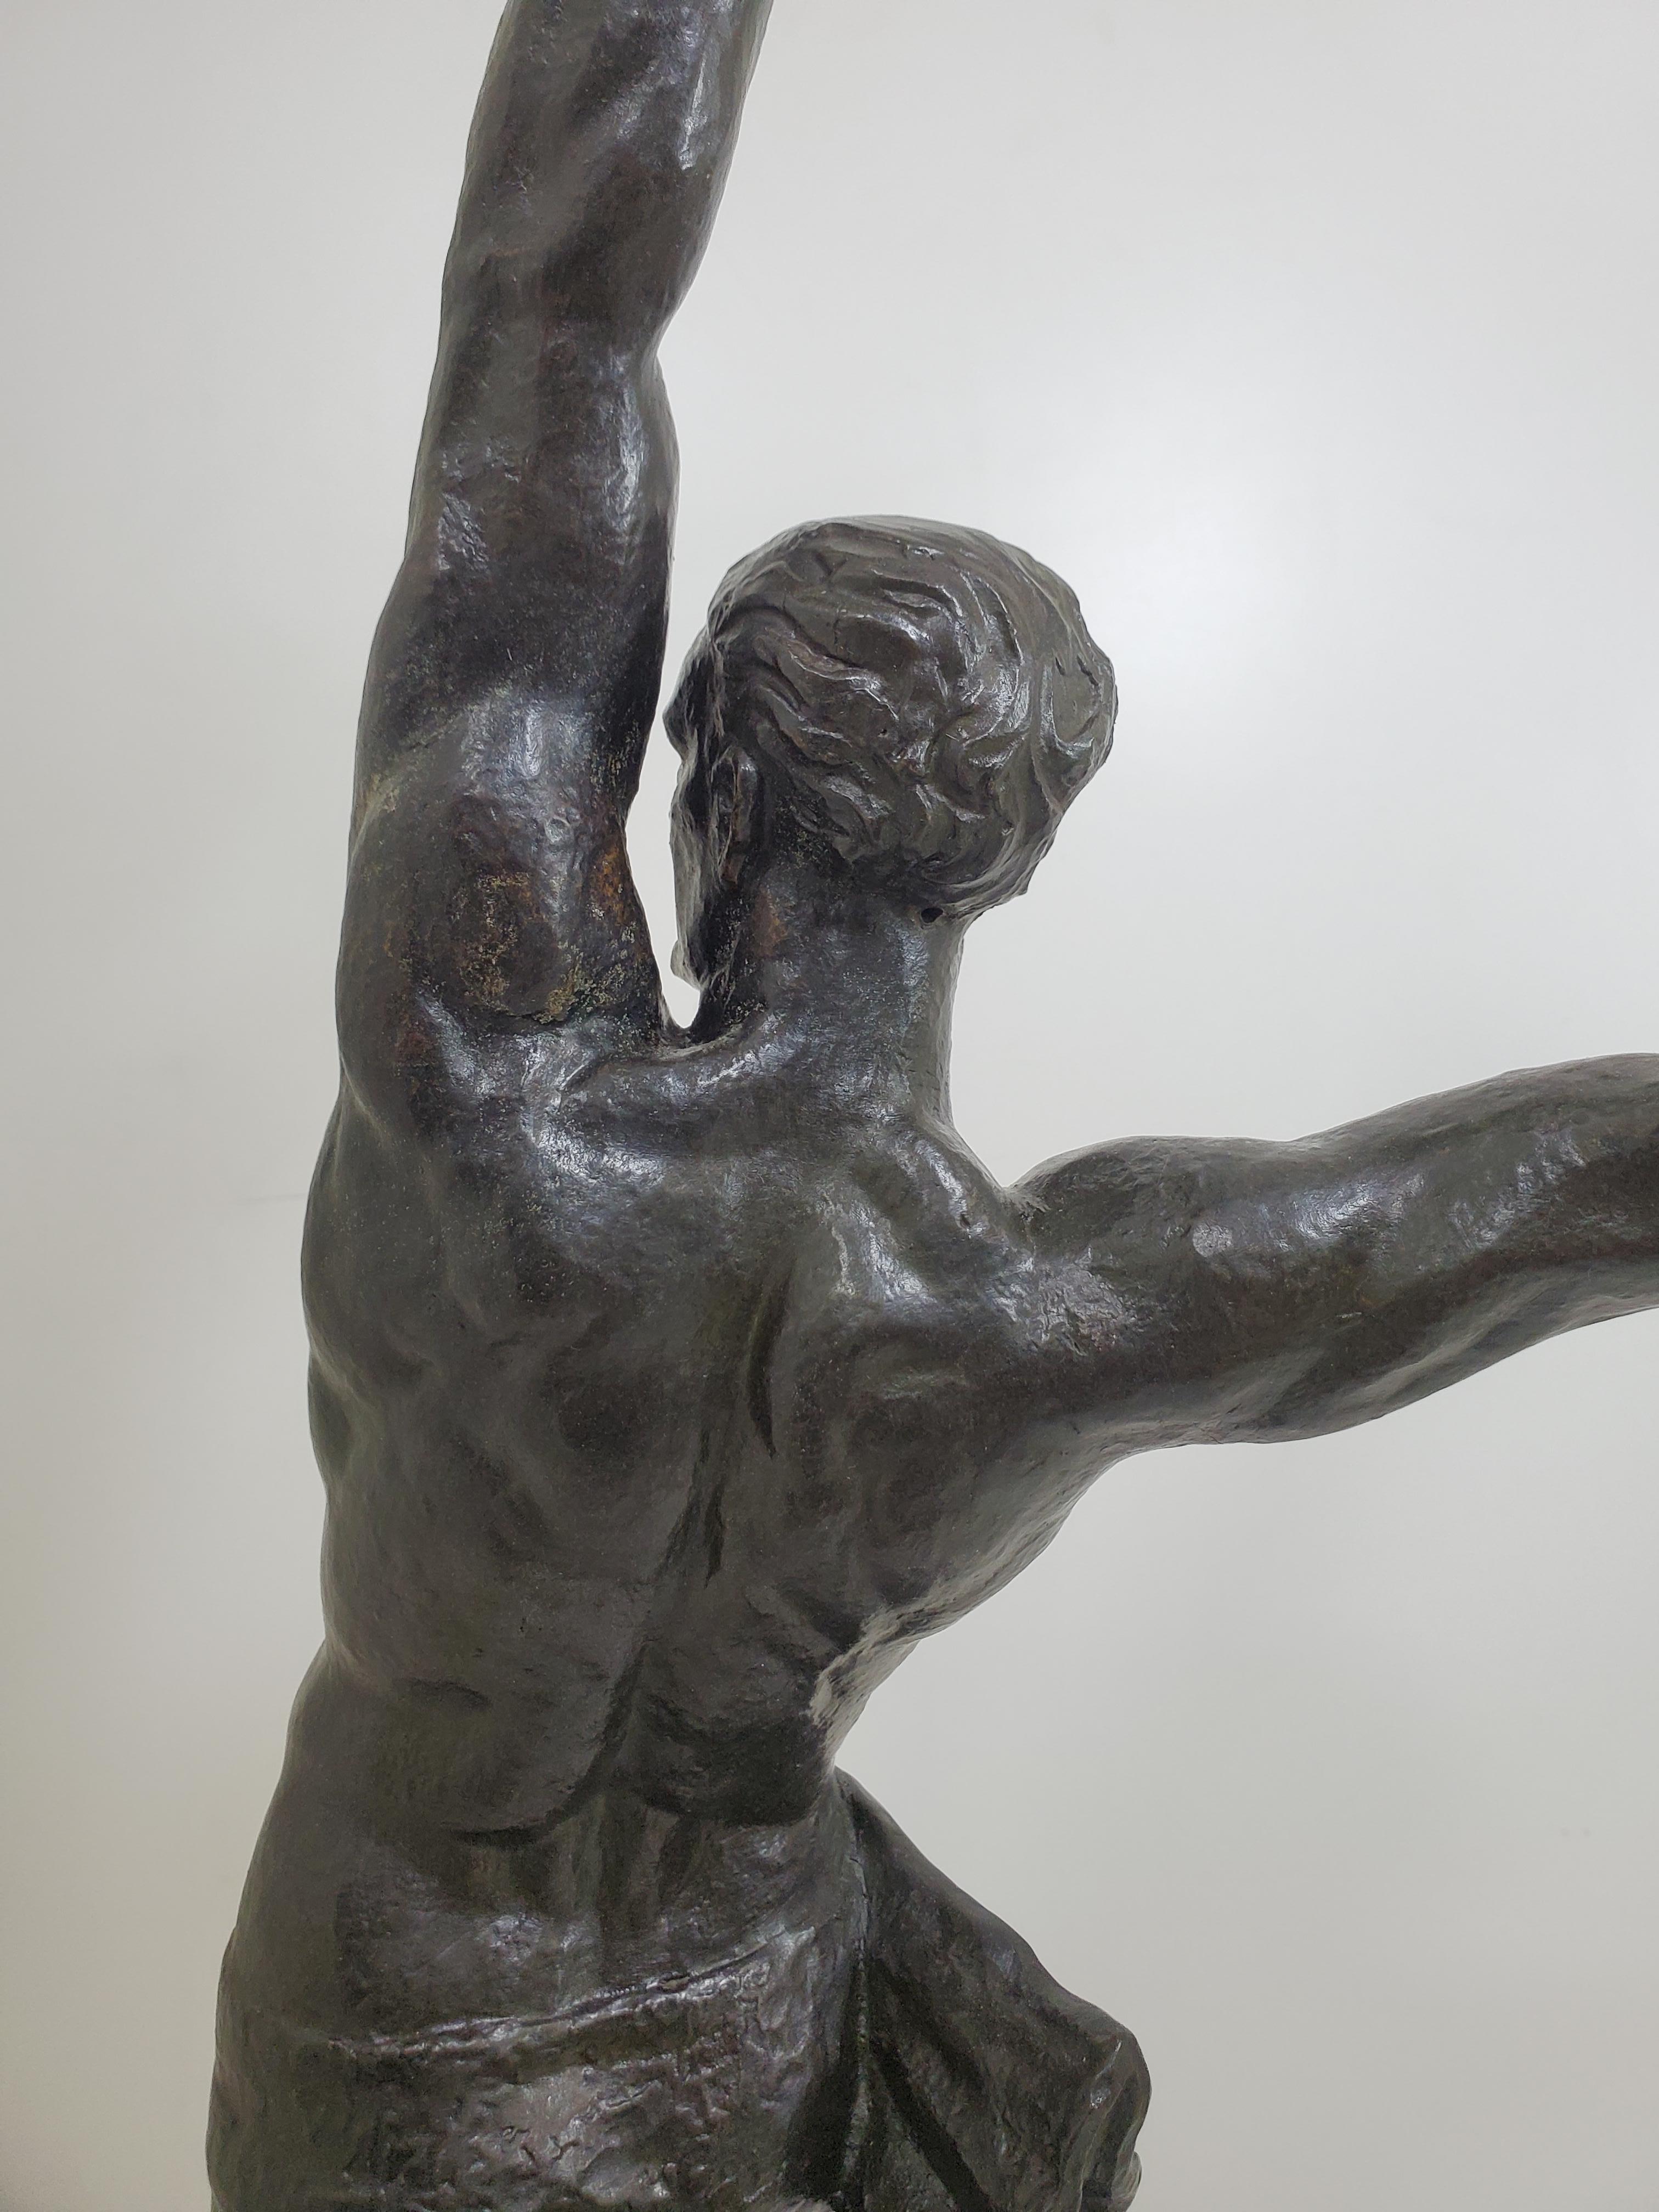 Large Original French Art Deco Bronze of a Semi-Nude Male Athlete by Le Faguays For Sale 1